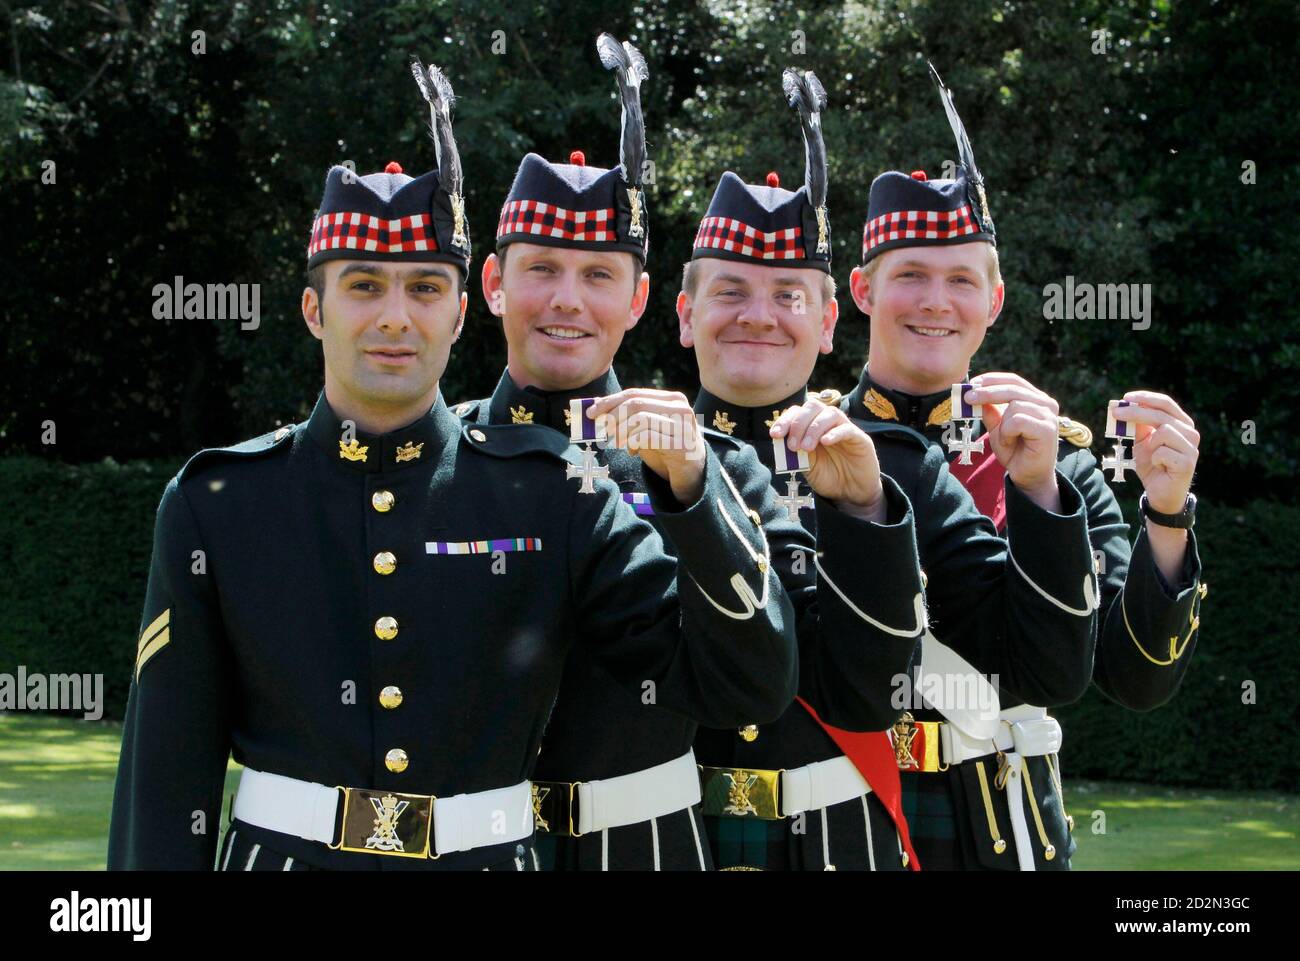 British soldiers (L-R) Corporal Christopher Reynolds, Corporal Craig Sharp, Corporal Richard Clark and Captain Alexander Phillips from The Royal Regiment of Scotland pose for photographers with their Military Cross medals after a presentation by the Queen at Holyrood Palace in Edinburgh, Scotland 13 July, 2010. REUTERS/David Moir (BRITAIN - Tags: CONFLICT POLITICS SOCIETY) Stock Photo